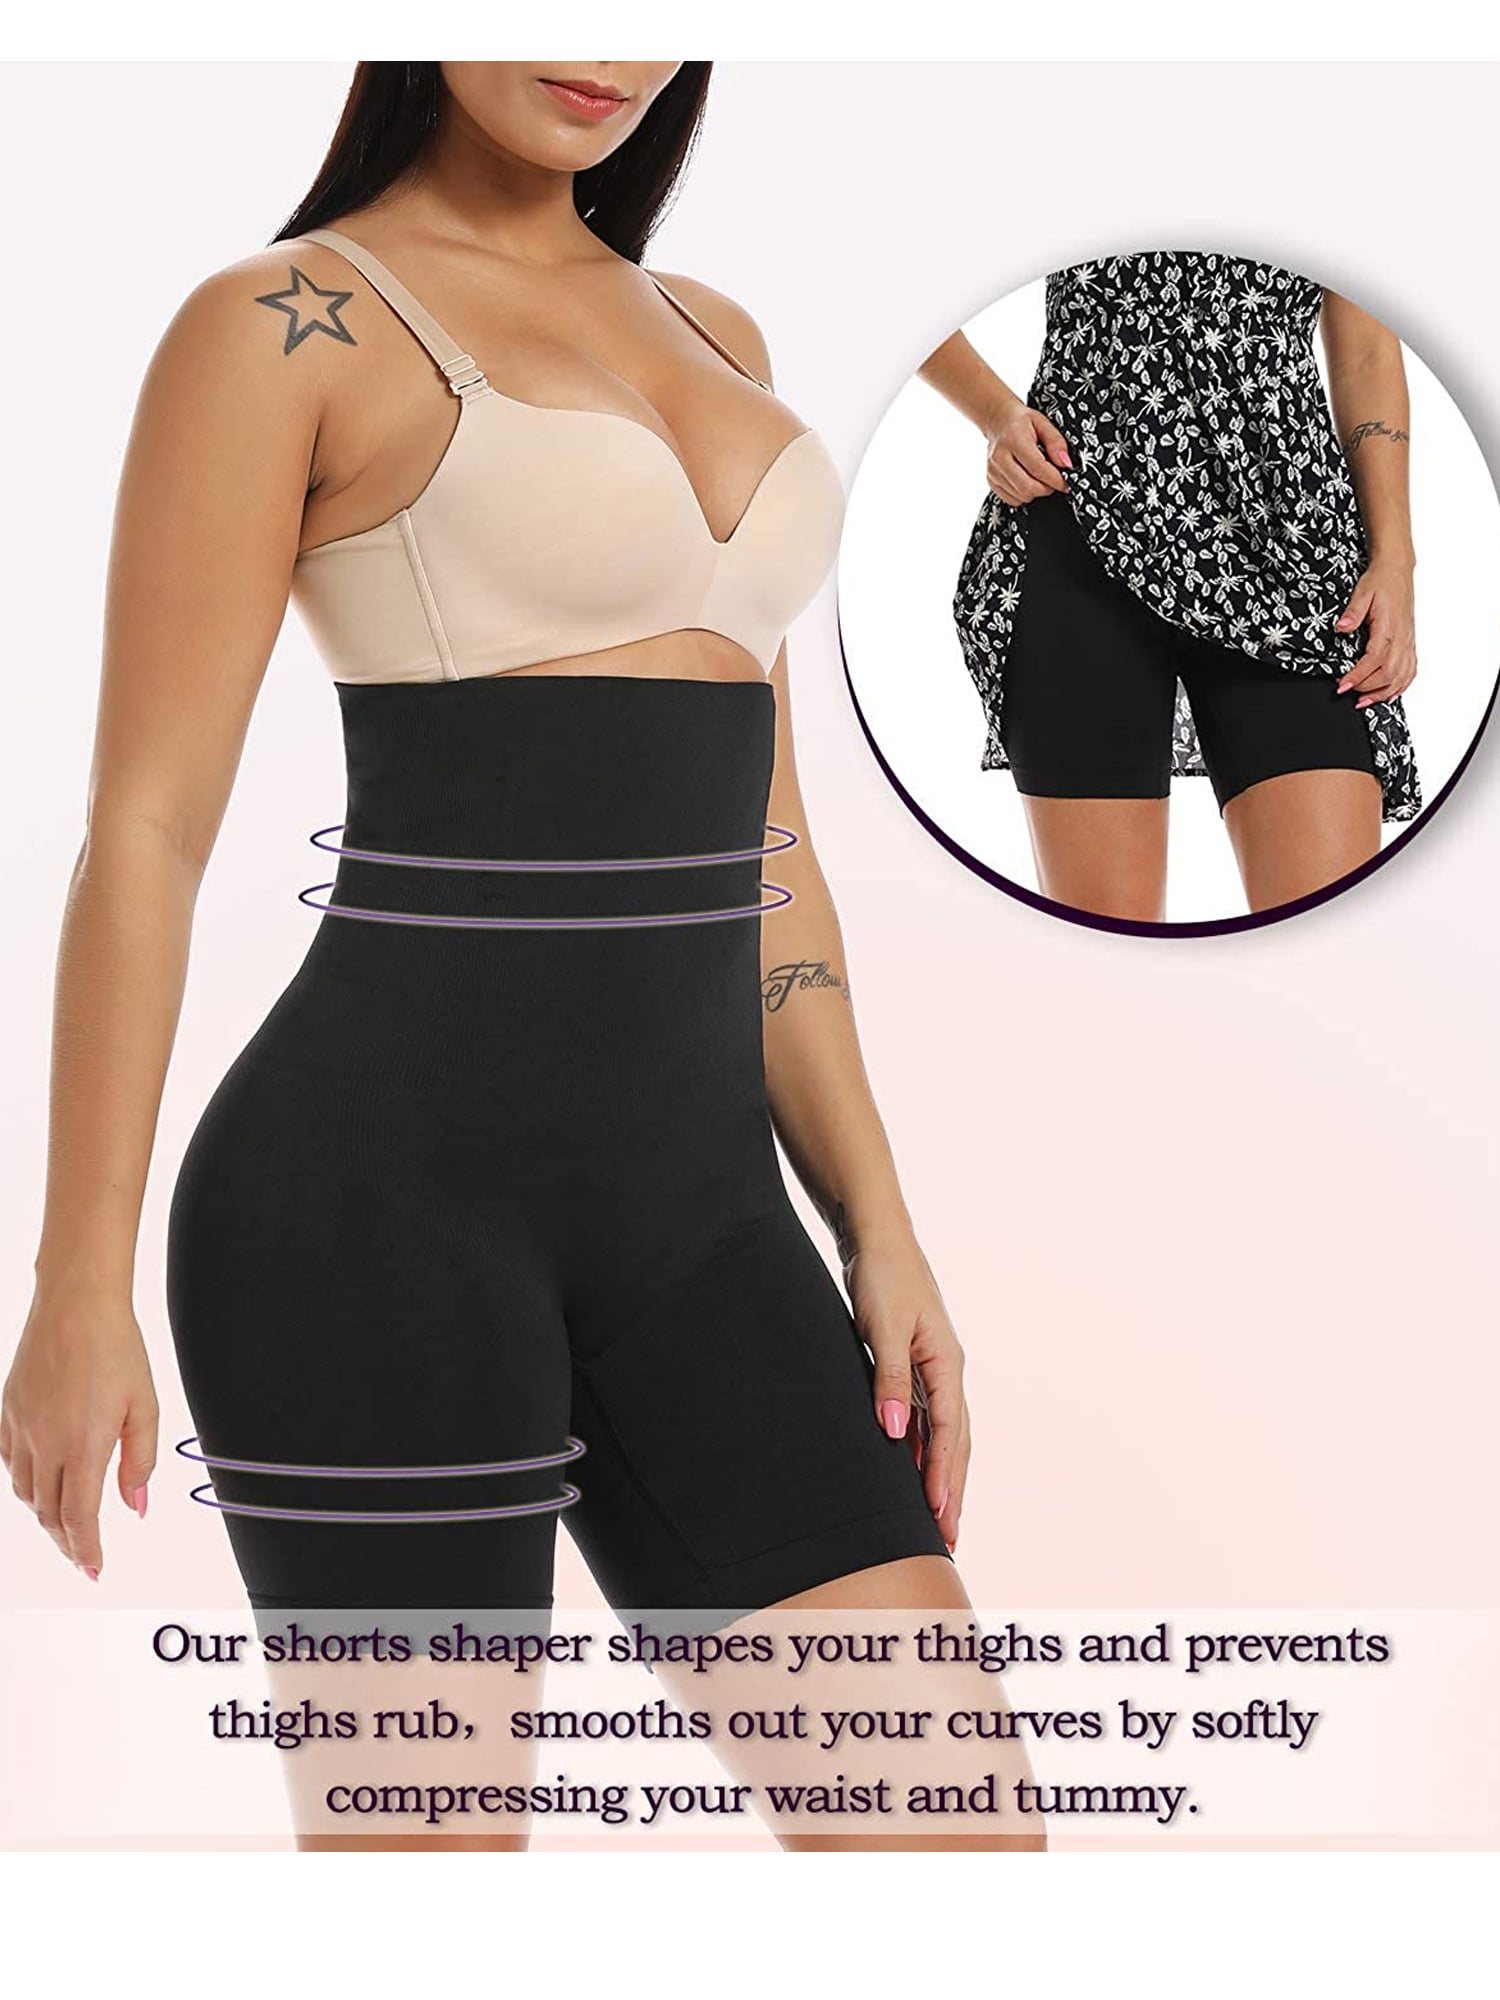 Jenbou Shapewear for Women High Waisted Body Shaper Tummy Control Panties  Waist Trainer Thigh Slimmer Shorts Nude at  Women's Clothing store